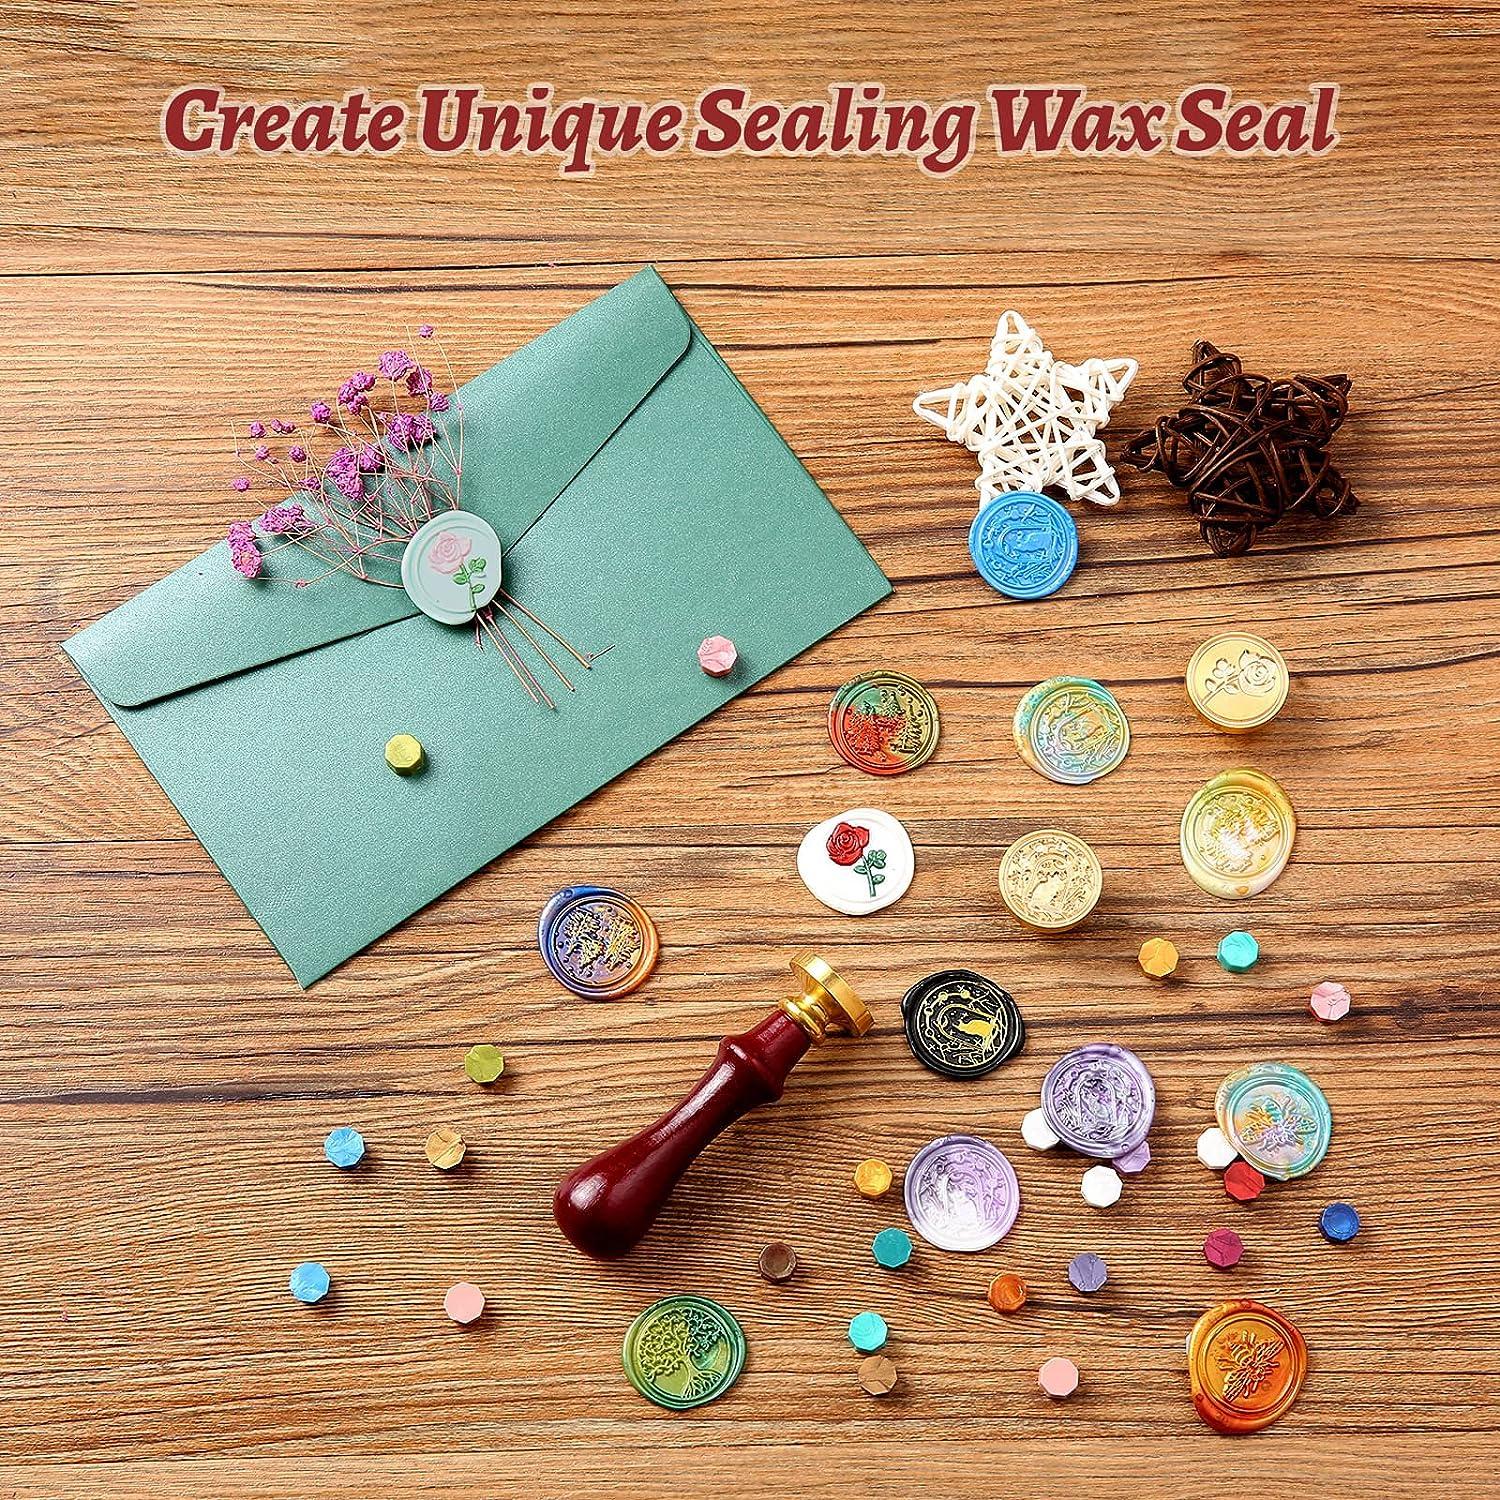 Wax Envelope Seal Stamp Kit, Wax Envelopes And Pen For Wax Seal, For Cards  Envelopes, Gift